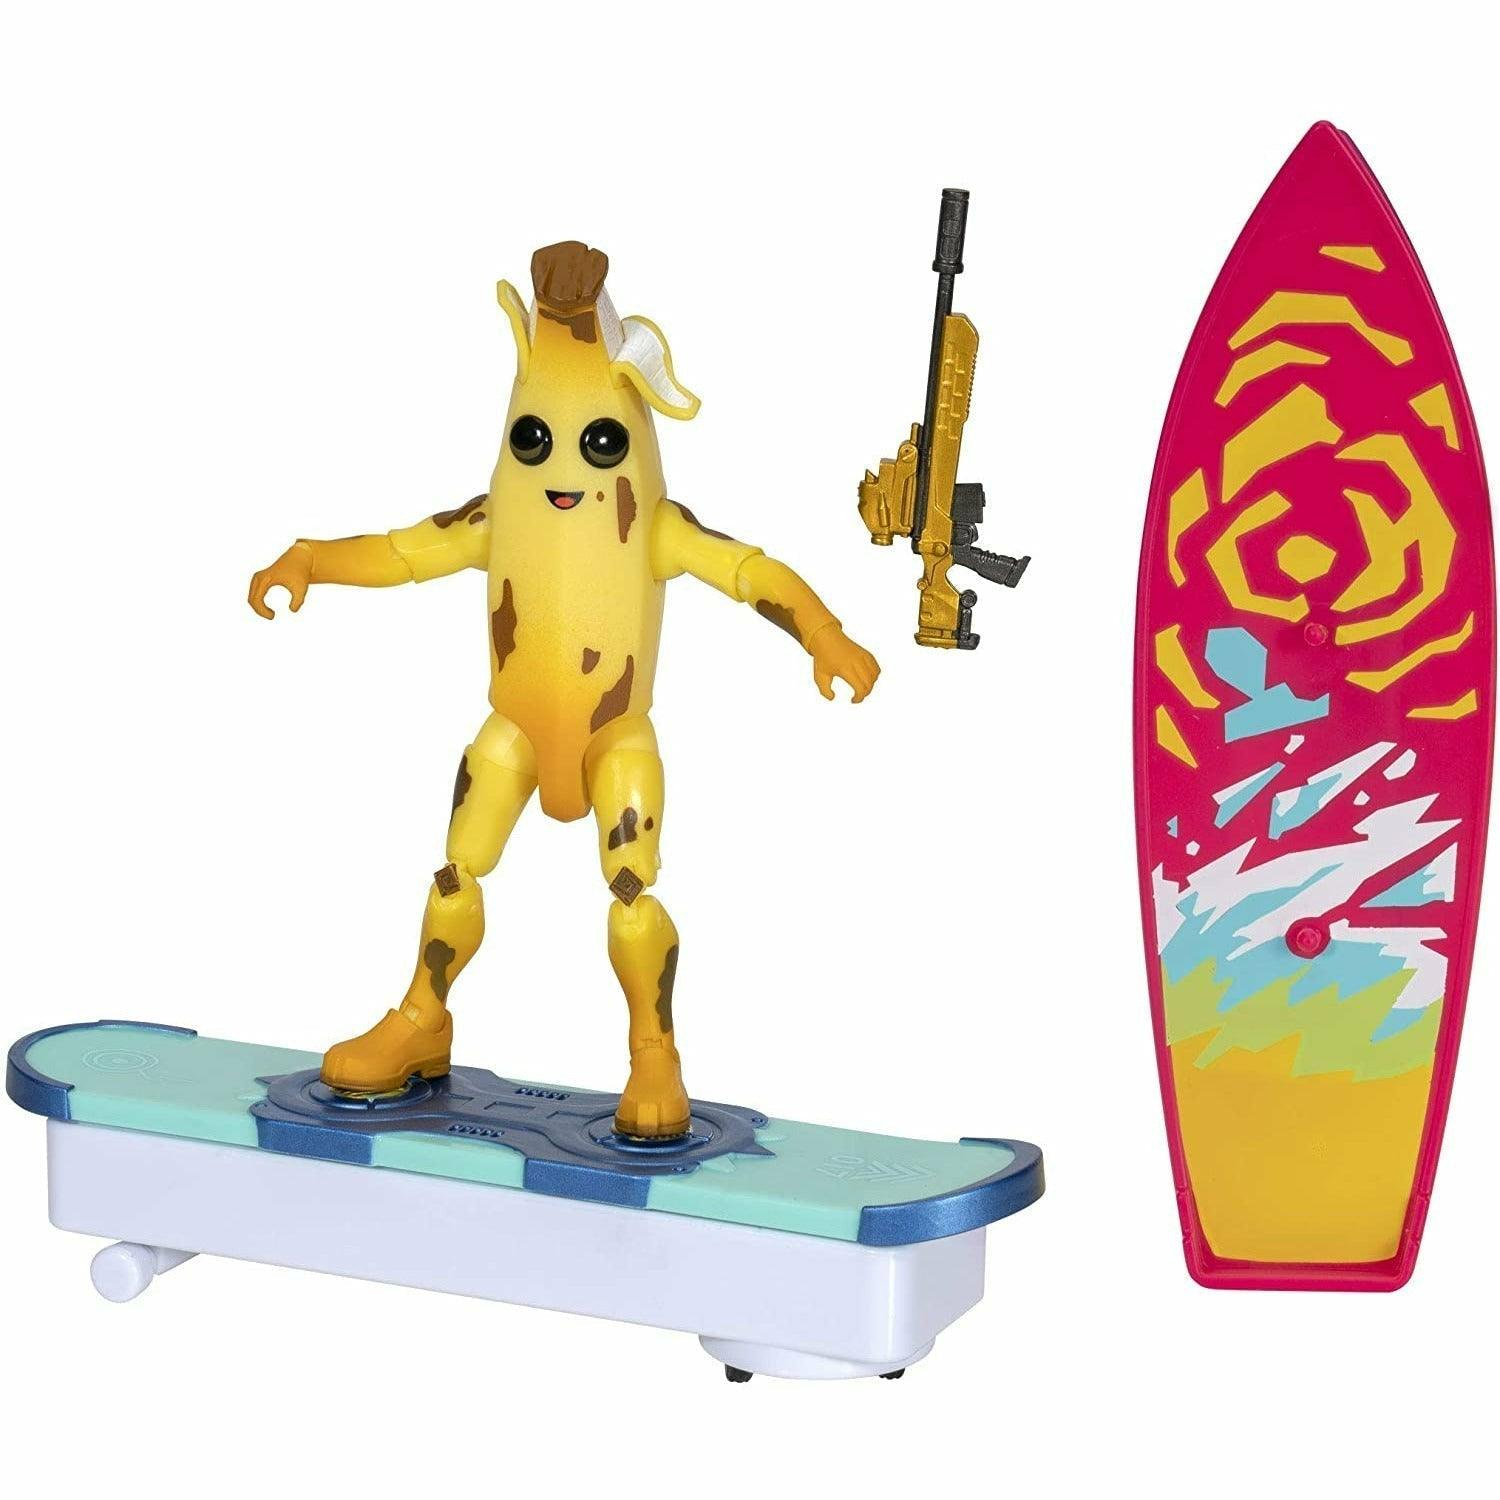 Fortnite Pelly Transforming Driftboard Vehicle - Interchangeable Surfboard and Driftboard Faceplates - BumbleToys - 8+ Years, 8-13 Years, Action Battling, Action Figures, Boys, Figures, Fortnite, OXE, Pre-Order